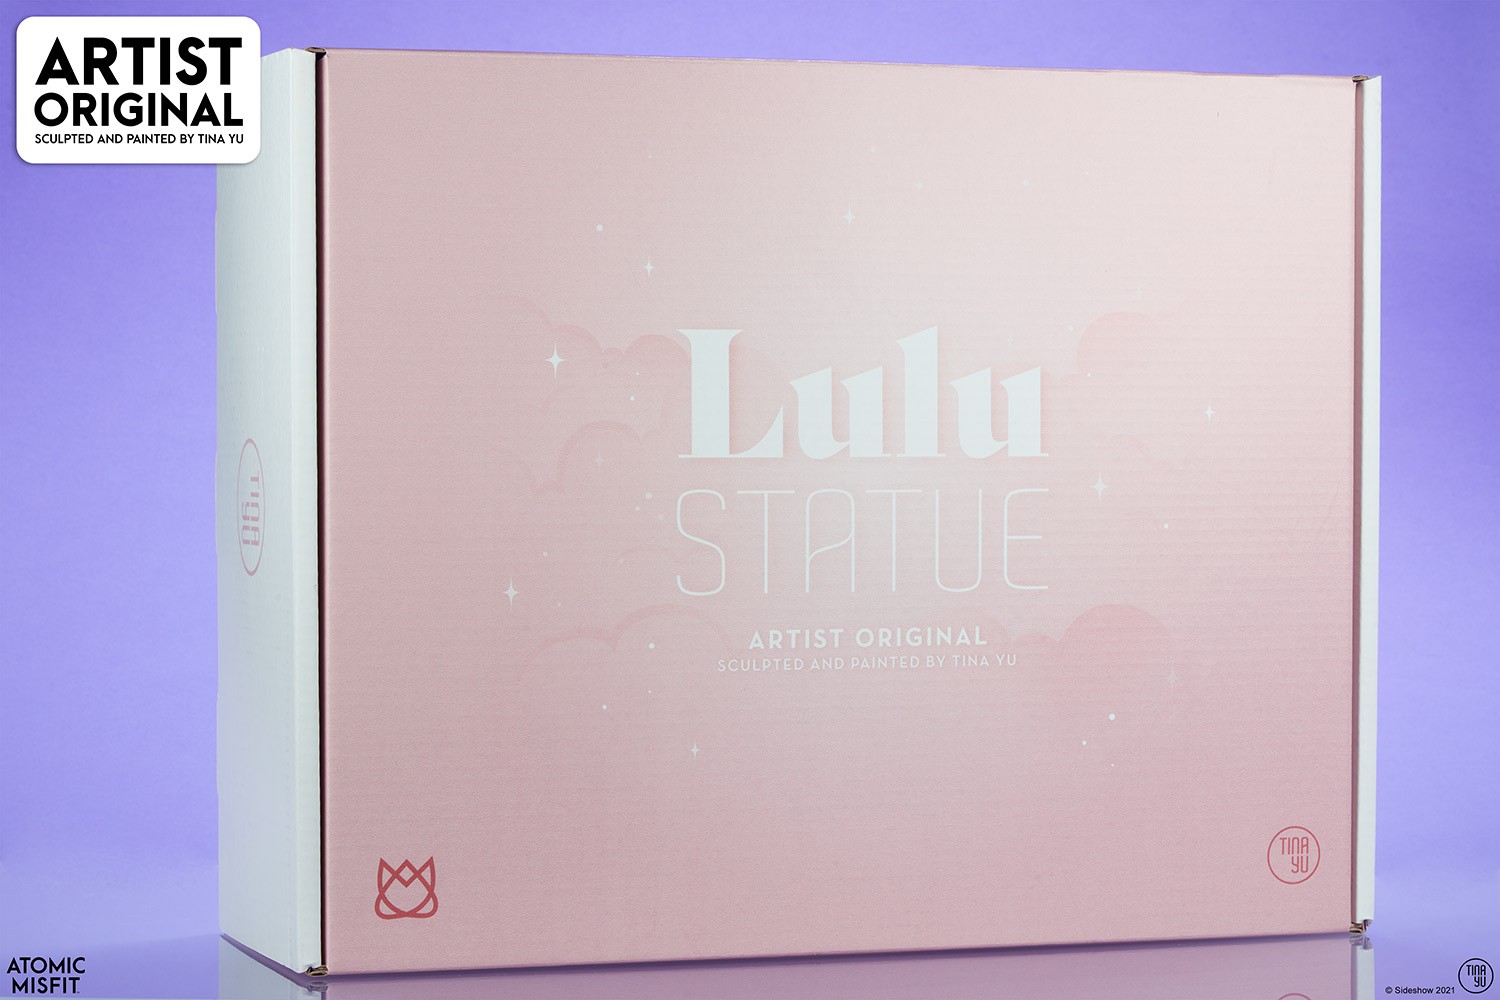 Lulu Exclusive Edition View 10